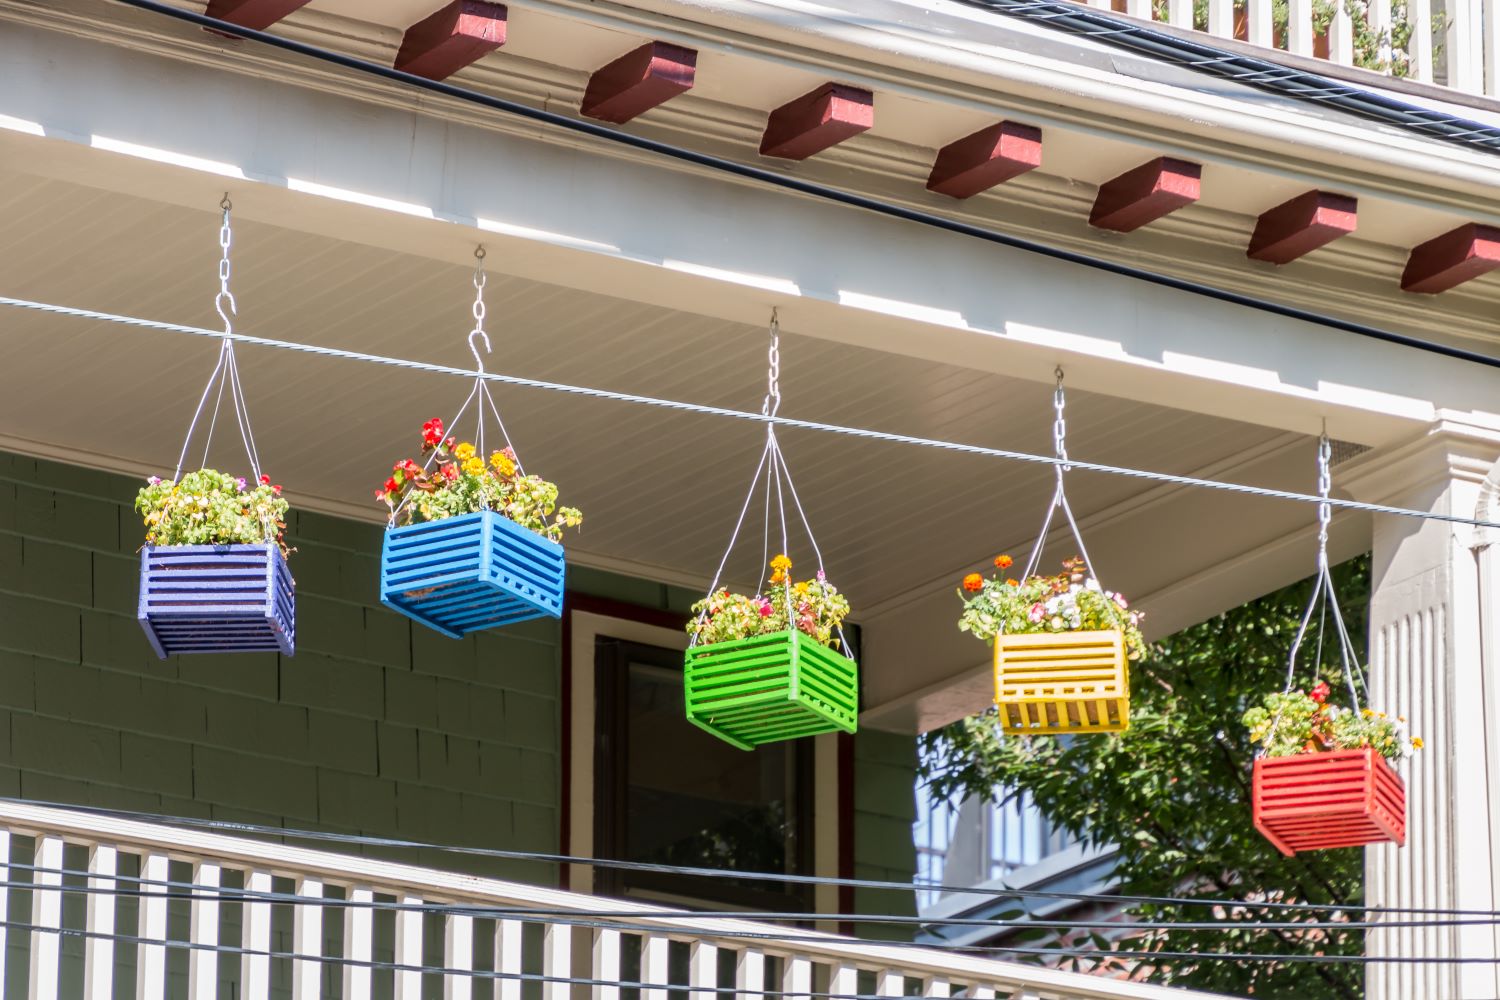 Reclaimed wooden boxes used as colorful planters in a porch.